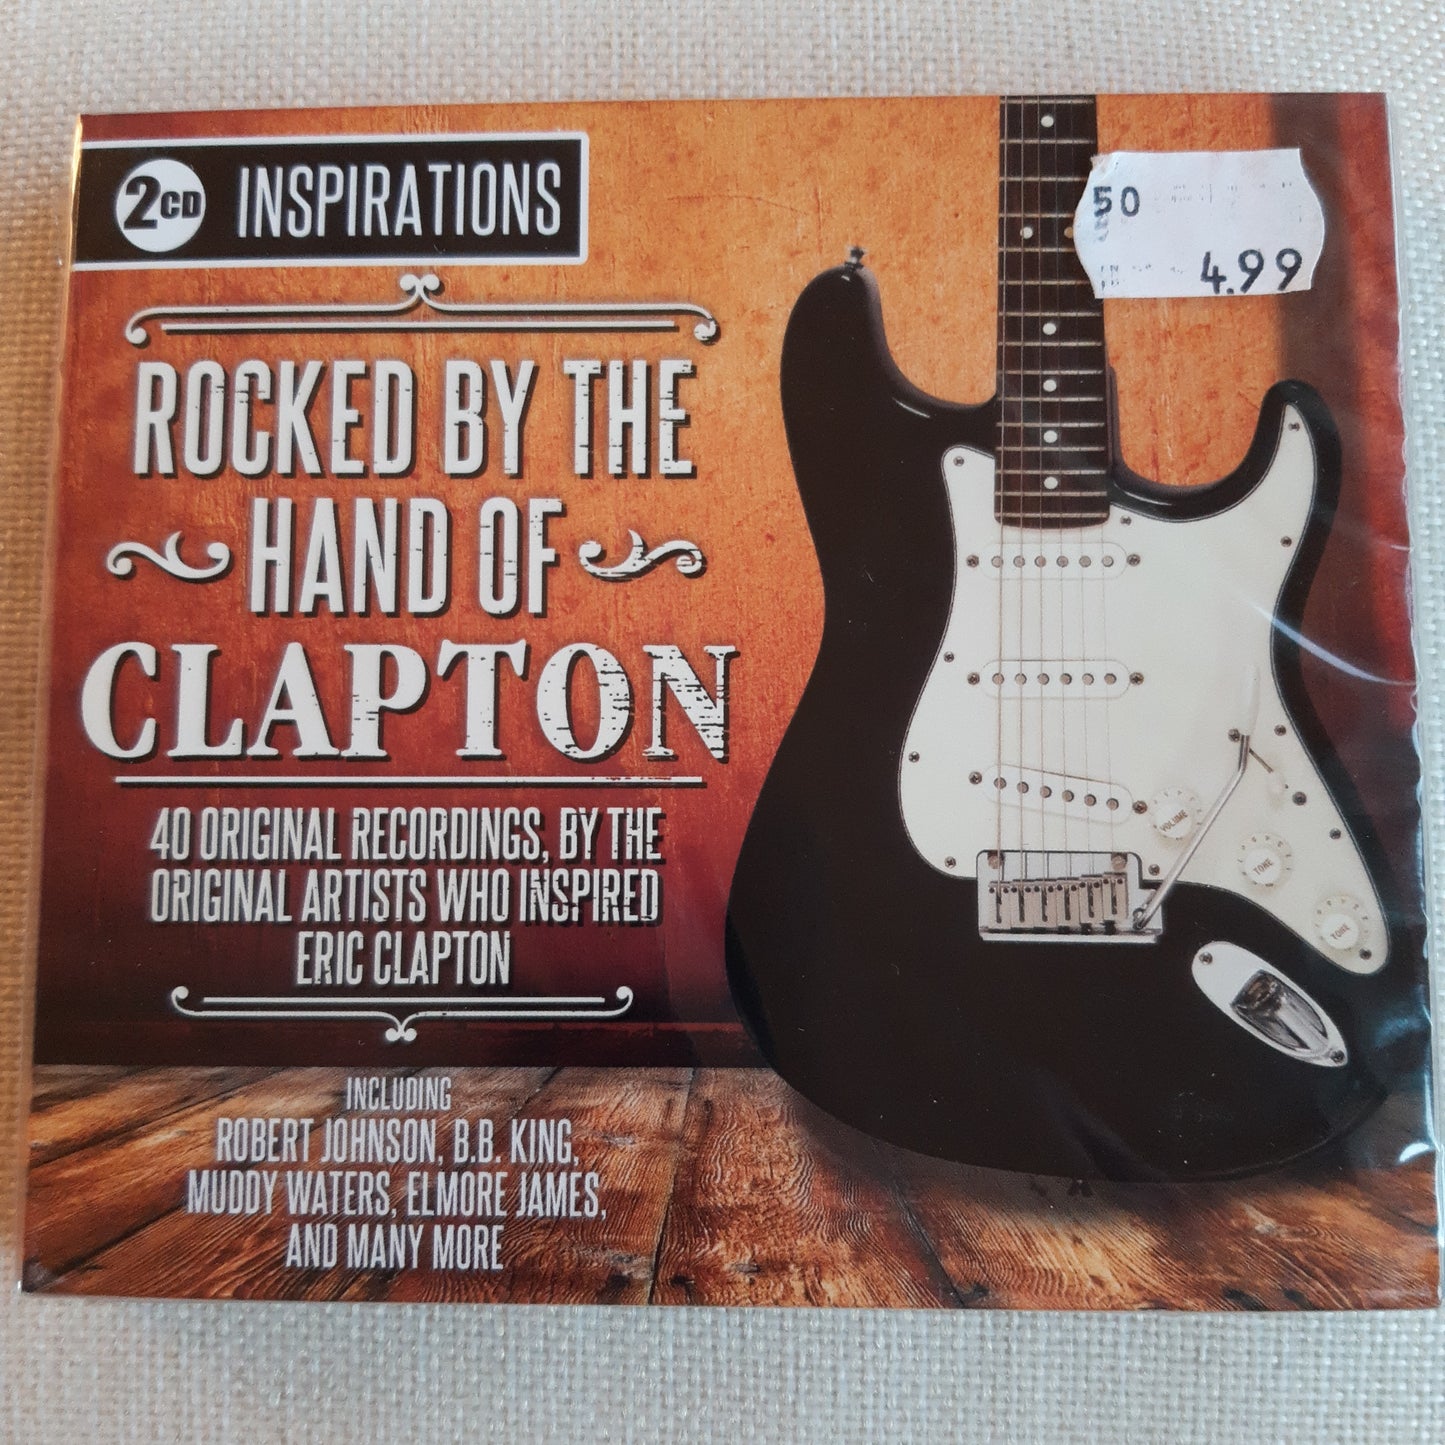 rocked by the hand of clapton - 2cd